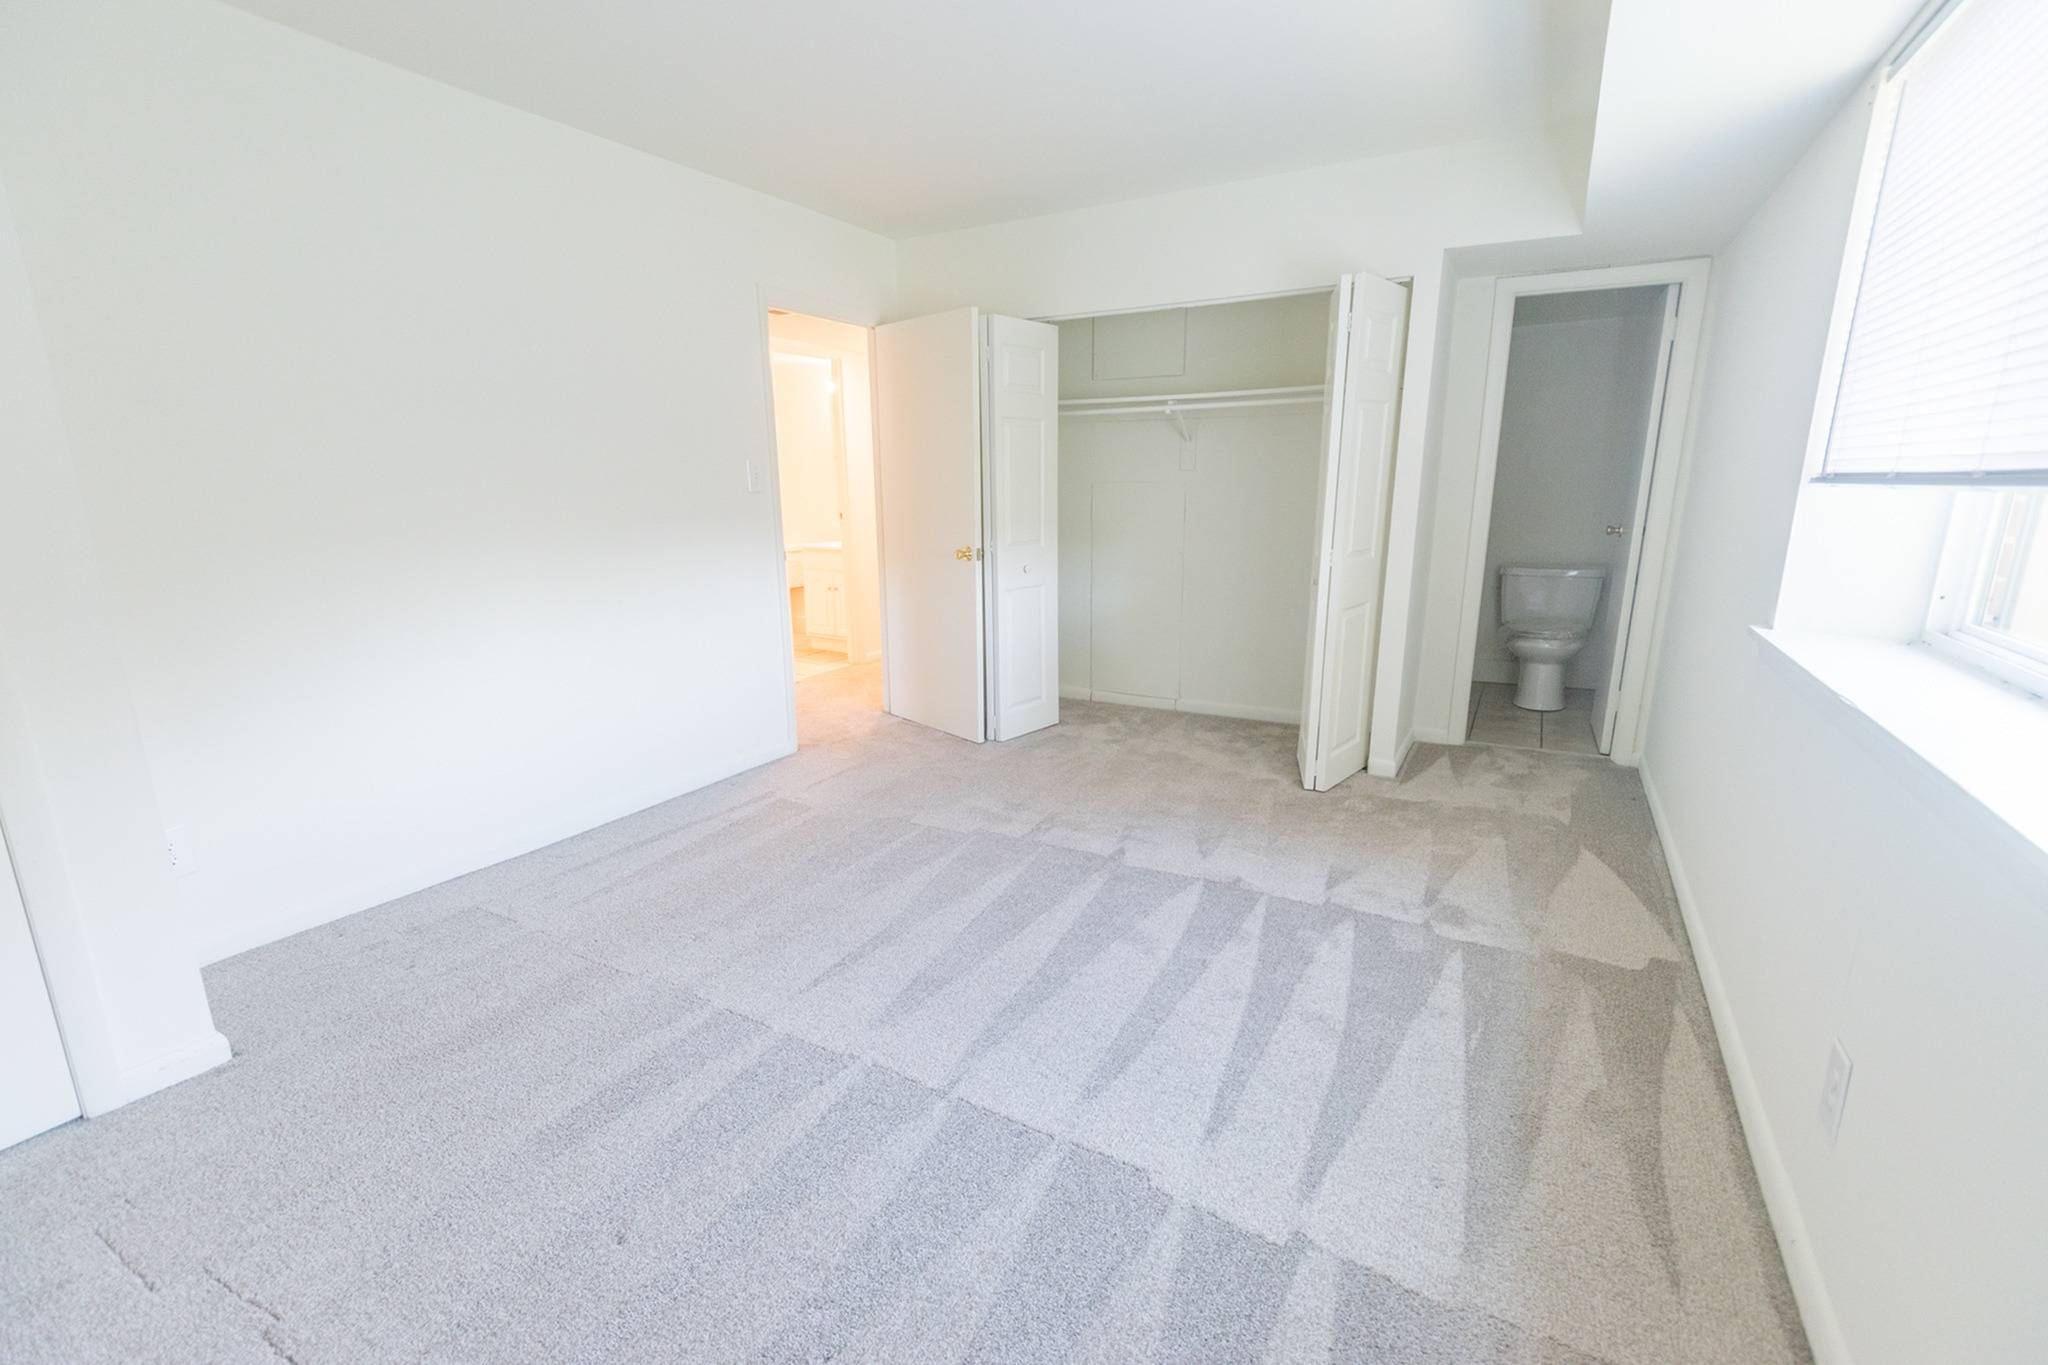 Bedroom area of an apartment unfurnished, fitted with carpet flooring, and a bathroom area